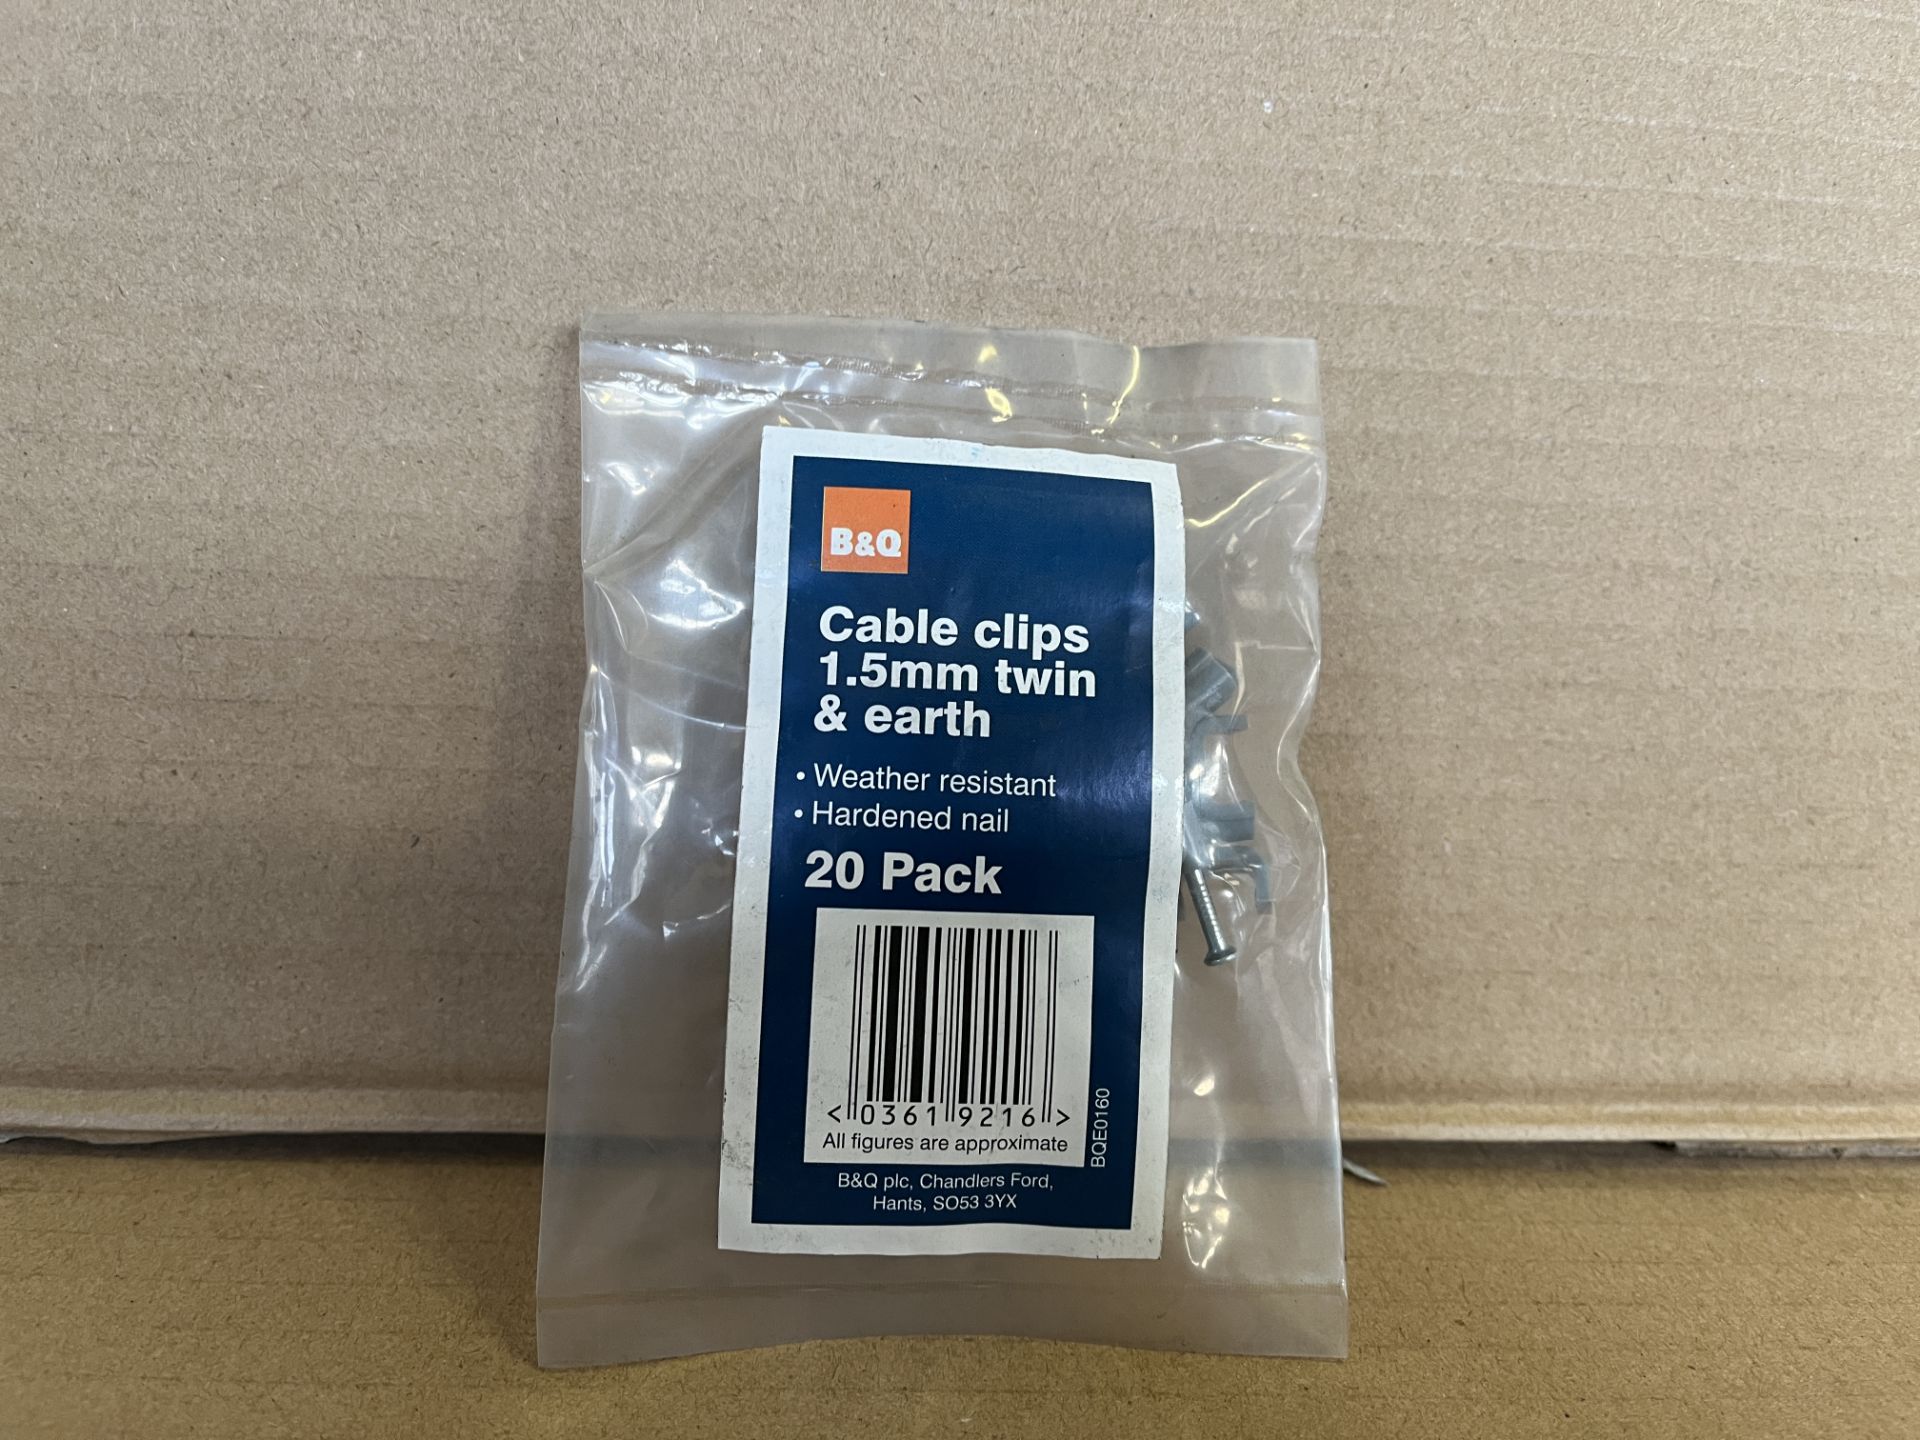 38 X BRAND NEW PACKS OF 20 CABLE CLIPS 1.5MM TWIN AND EARTH S1-25